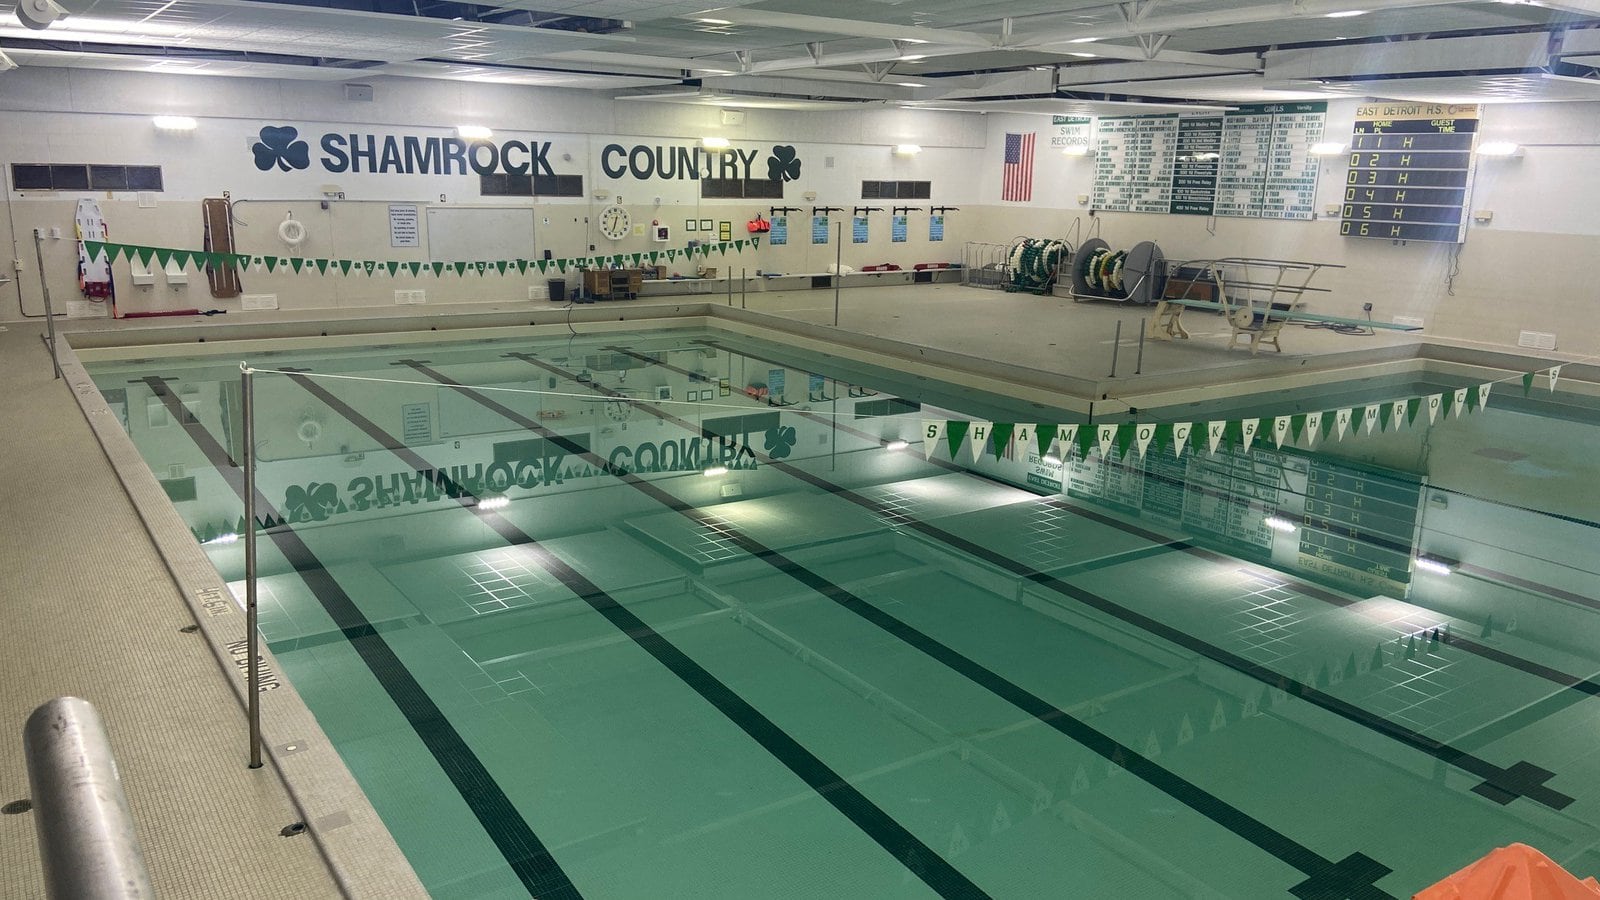 A swimming pool in the Eastpointe school district.